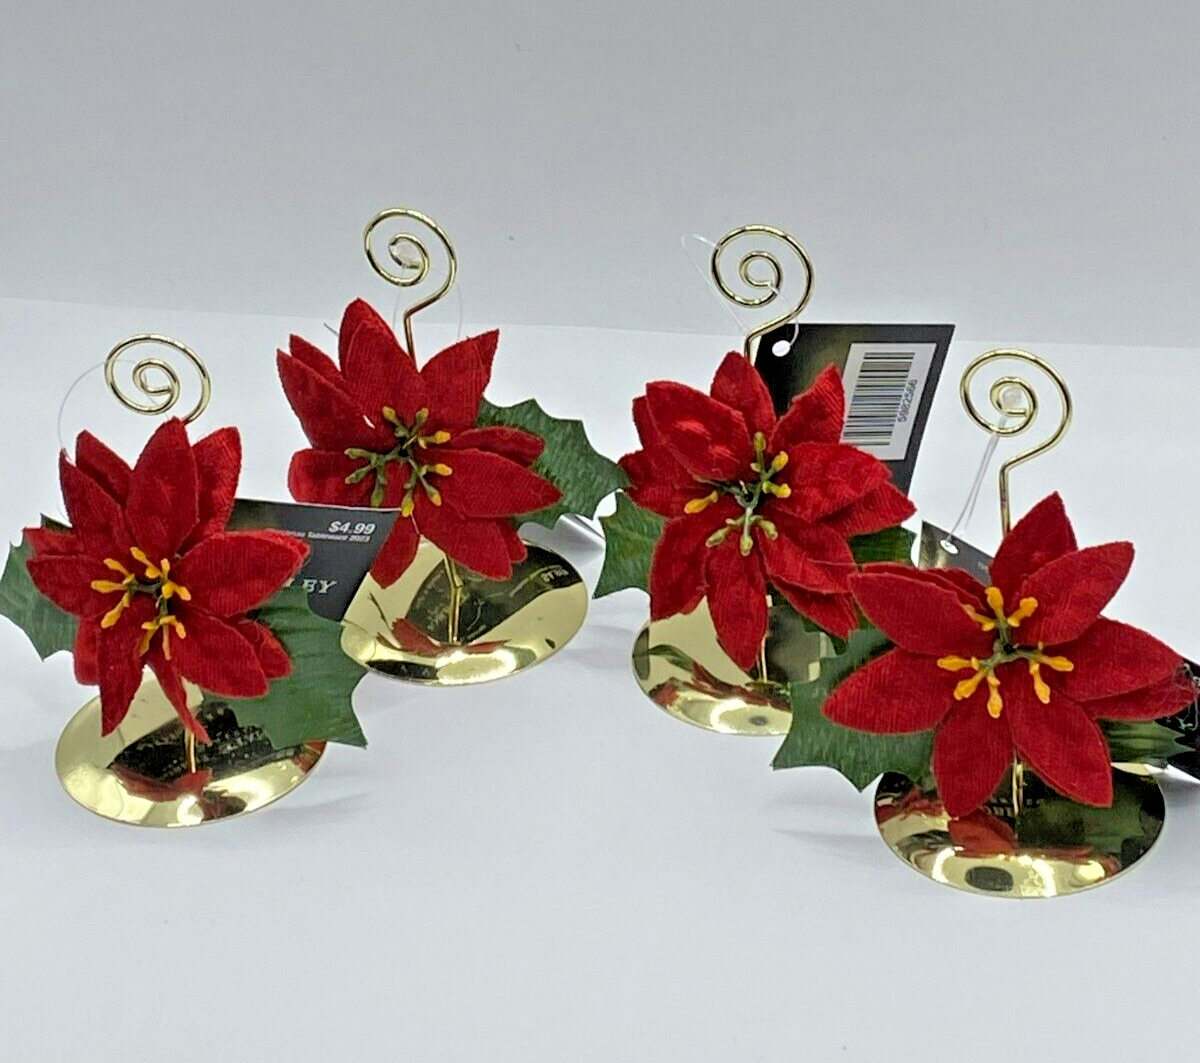 NEW ROBERT STANLEY RED POINSETTIA PLACE CARD HOLDERS SET OF 4